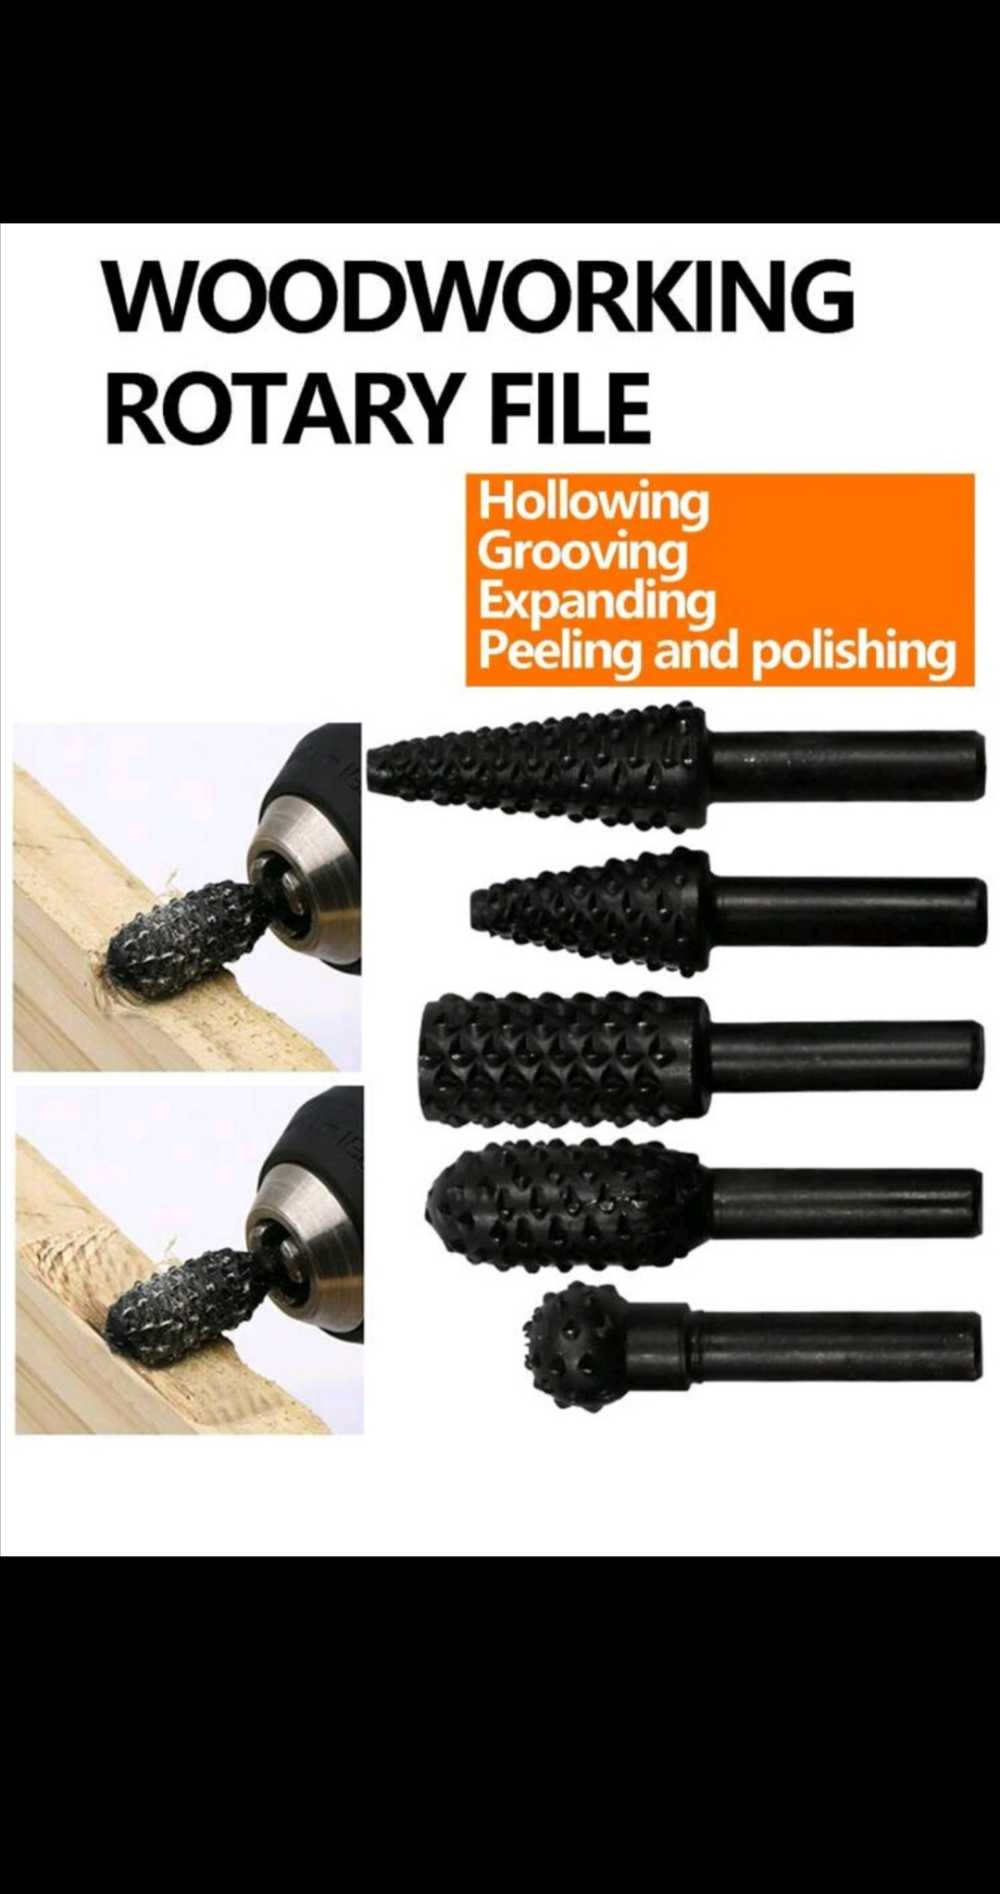 Woodworking - 5 pc Rotary Rasp wood carving bits was listed for R99.00 ...